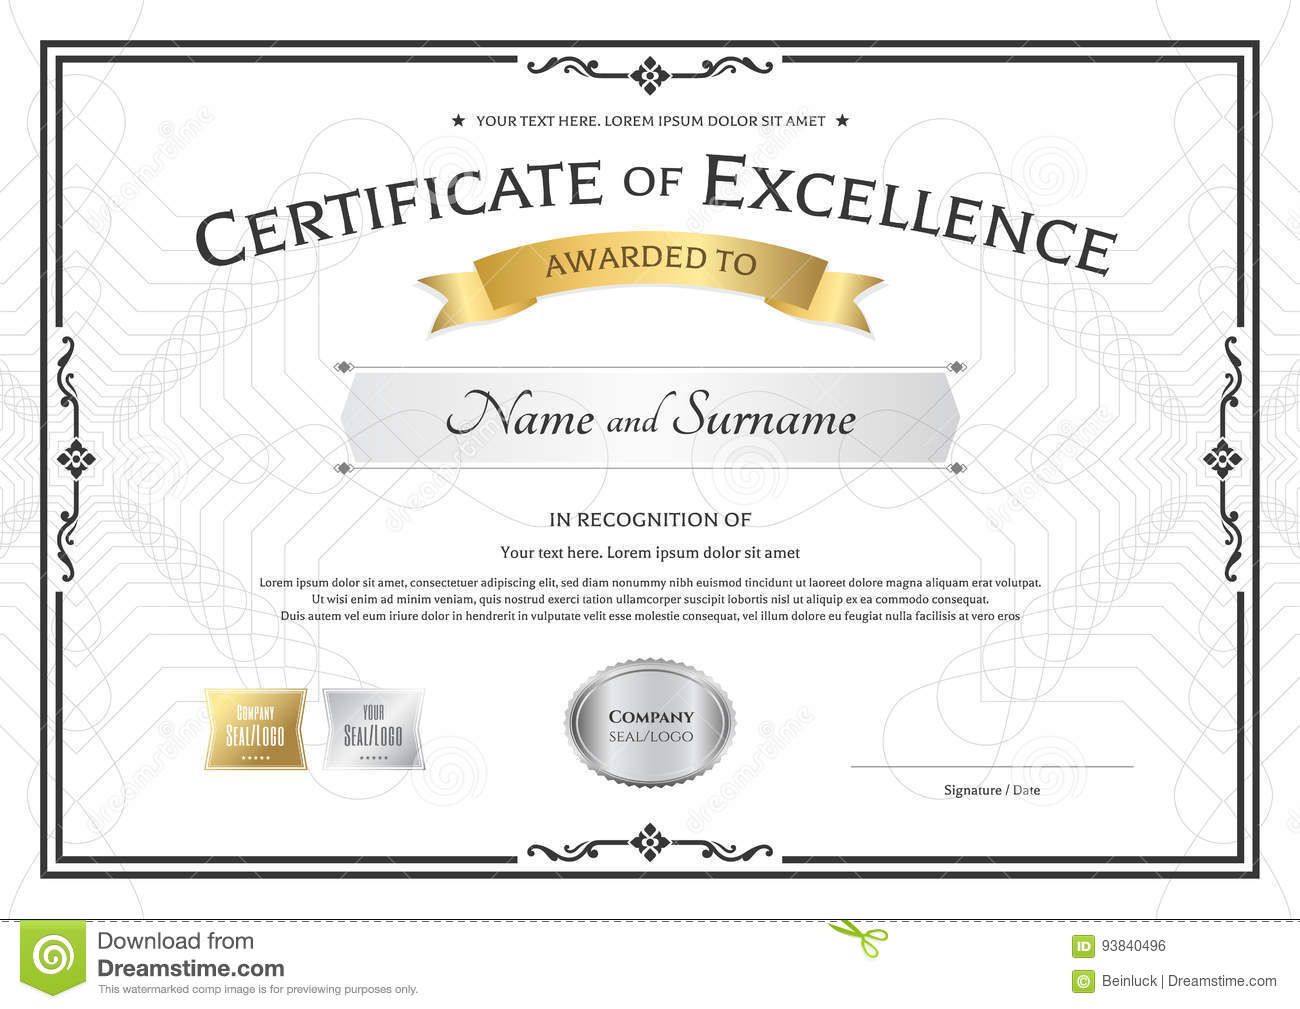 Certificate Of Excellence Template With Gold Award Ribbon On Within Award Of Excellence Certificate Template